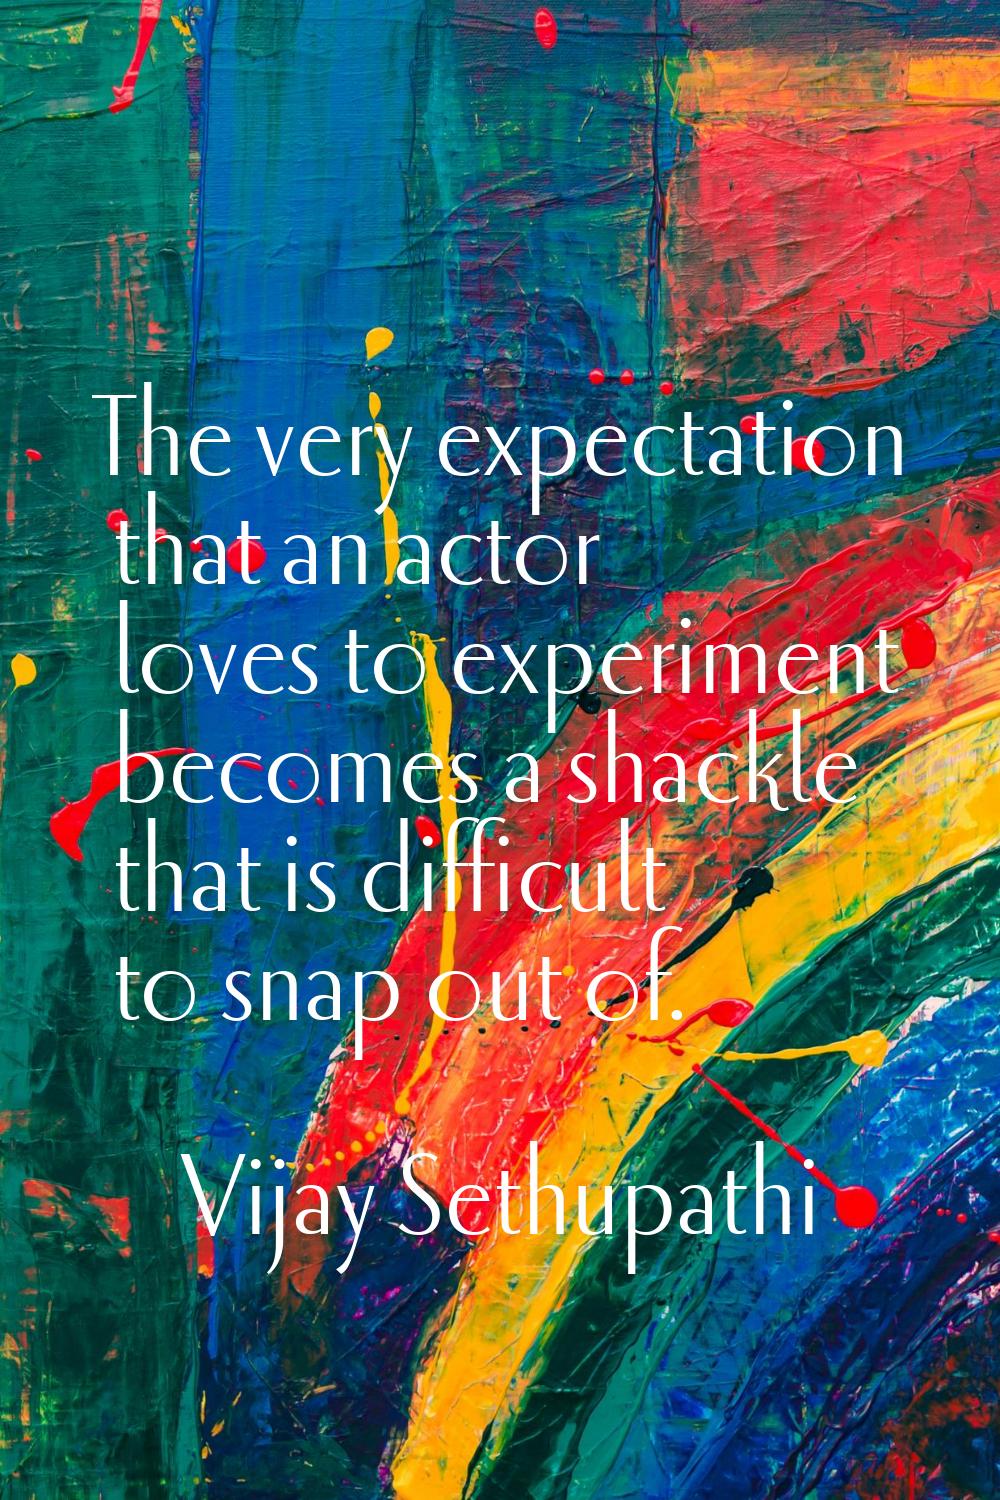 The very expectation that an actor loves to experiment becomes a shackle that is difficult to snap 